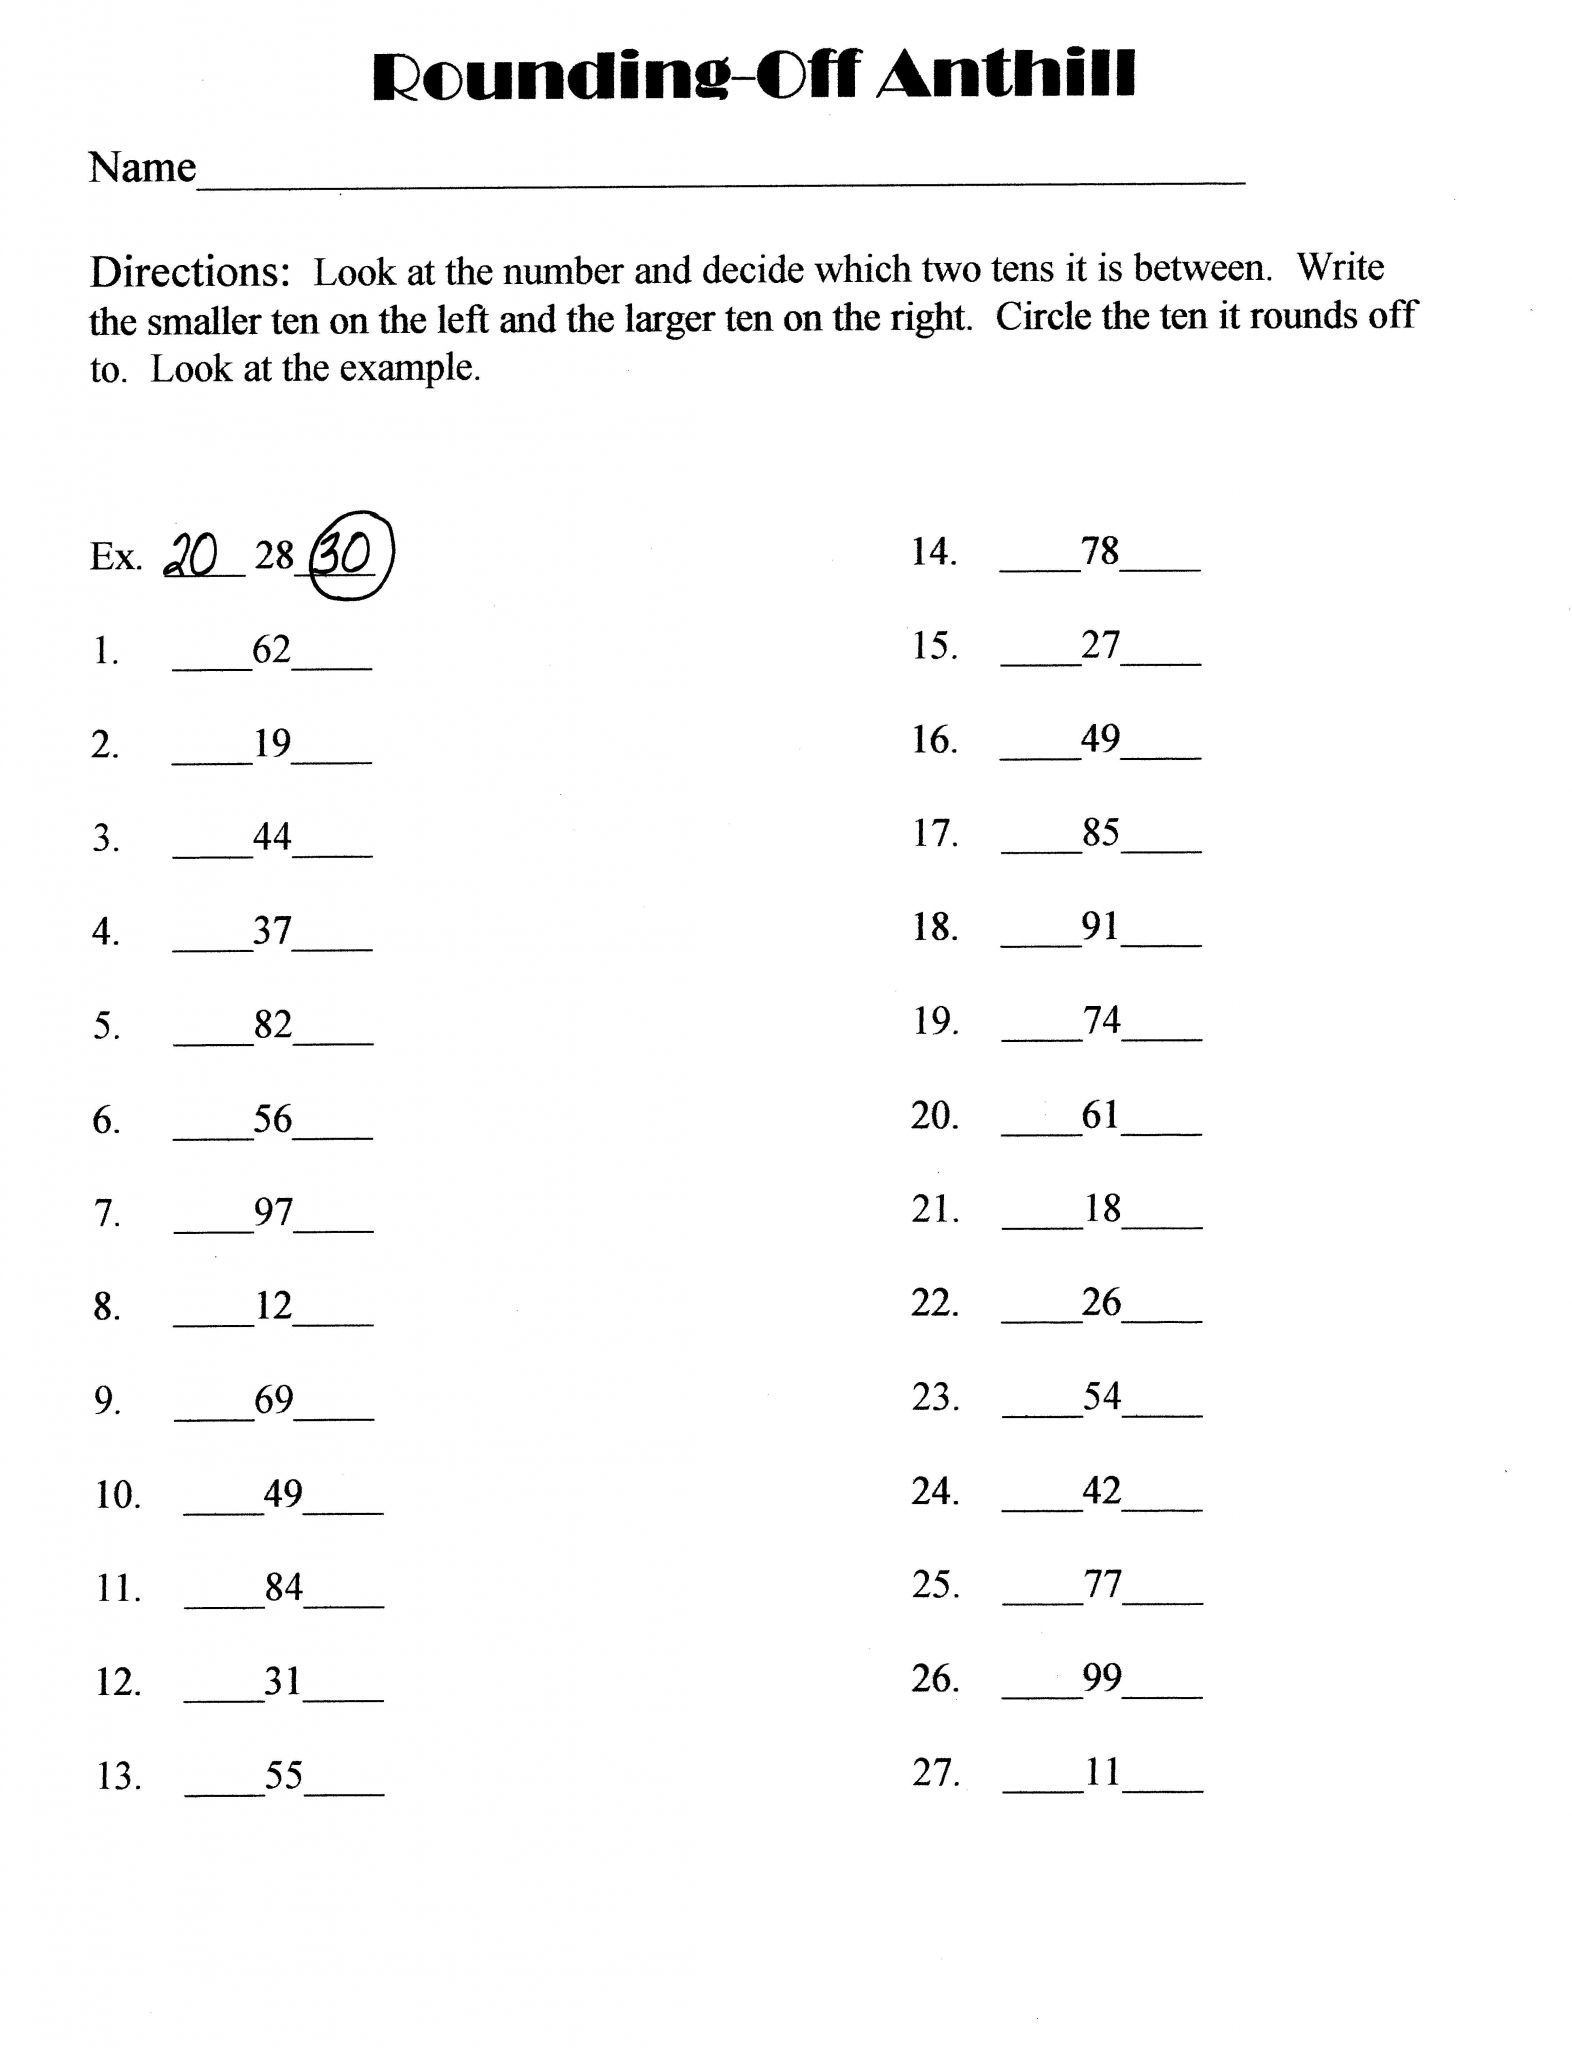 Independent Practice Math Worksheet Answers as Well as Nc Mathematics Elementary Professional Development Resources